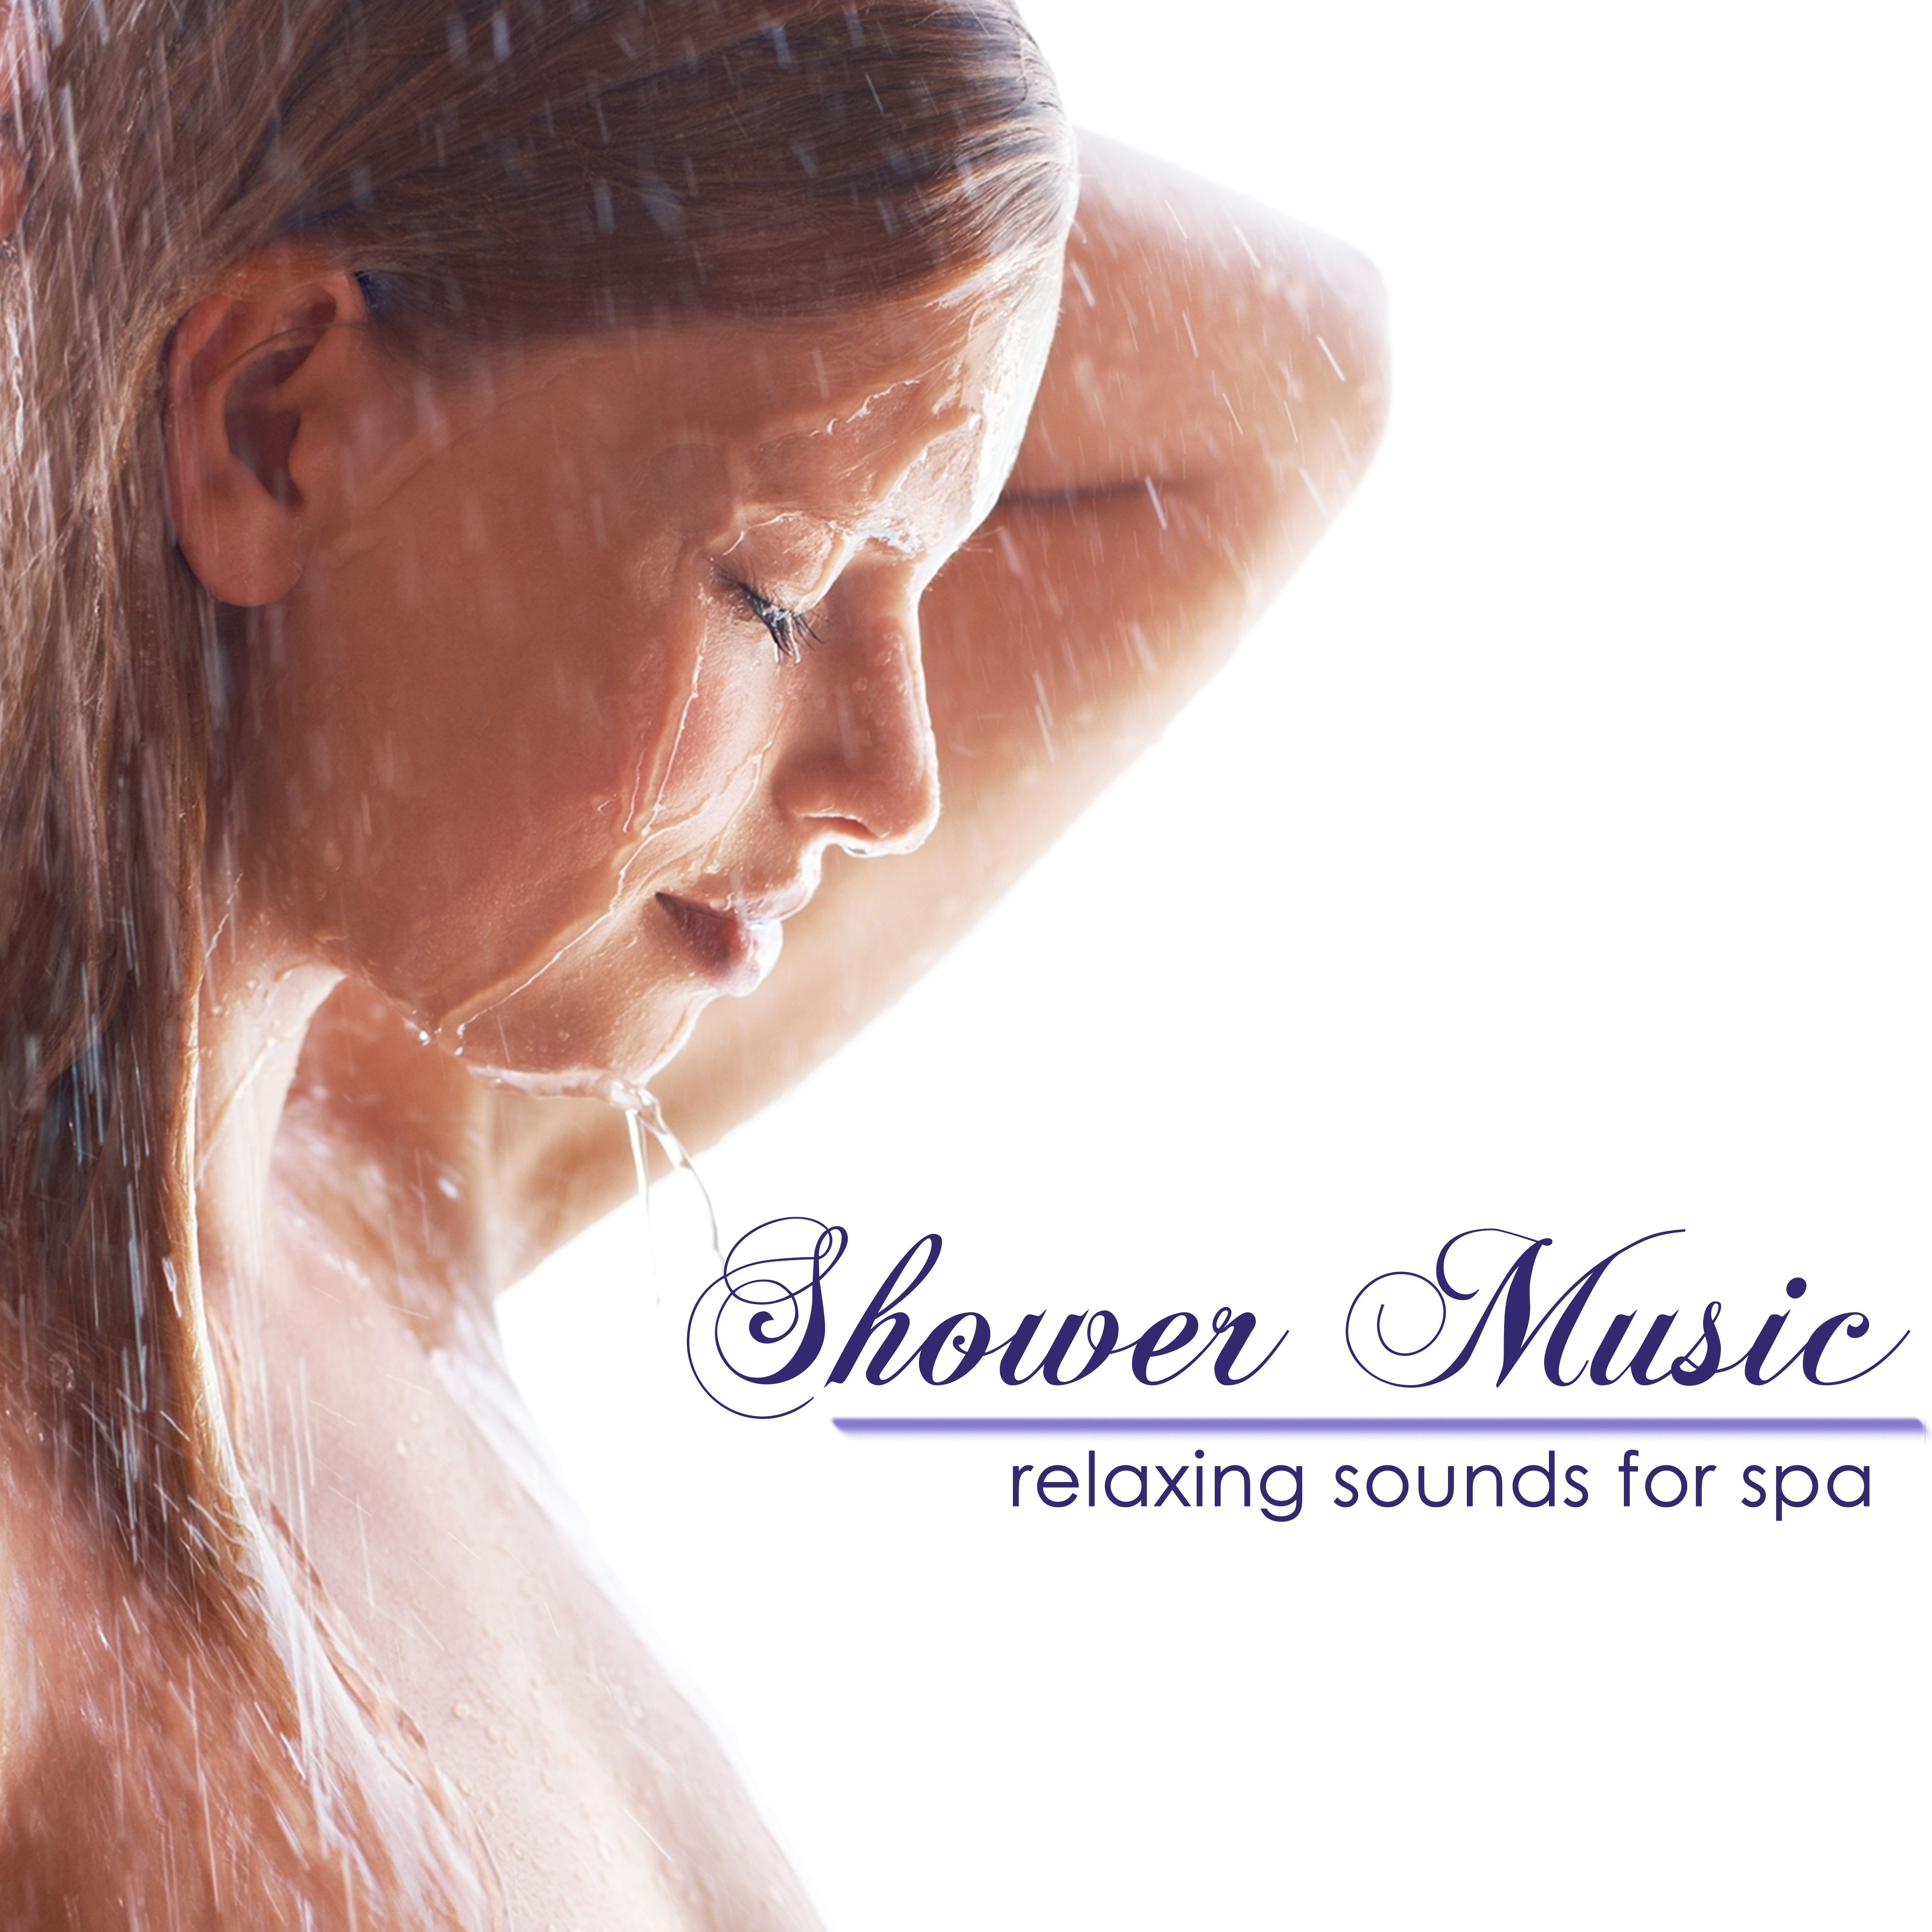 Shower Music  Relaxing Sounds for Spa, Easy Listening Music for Self Care